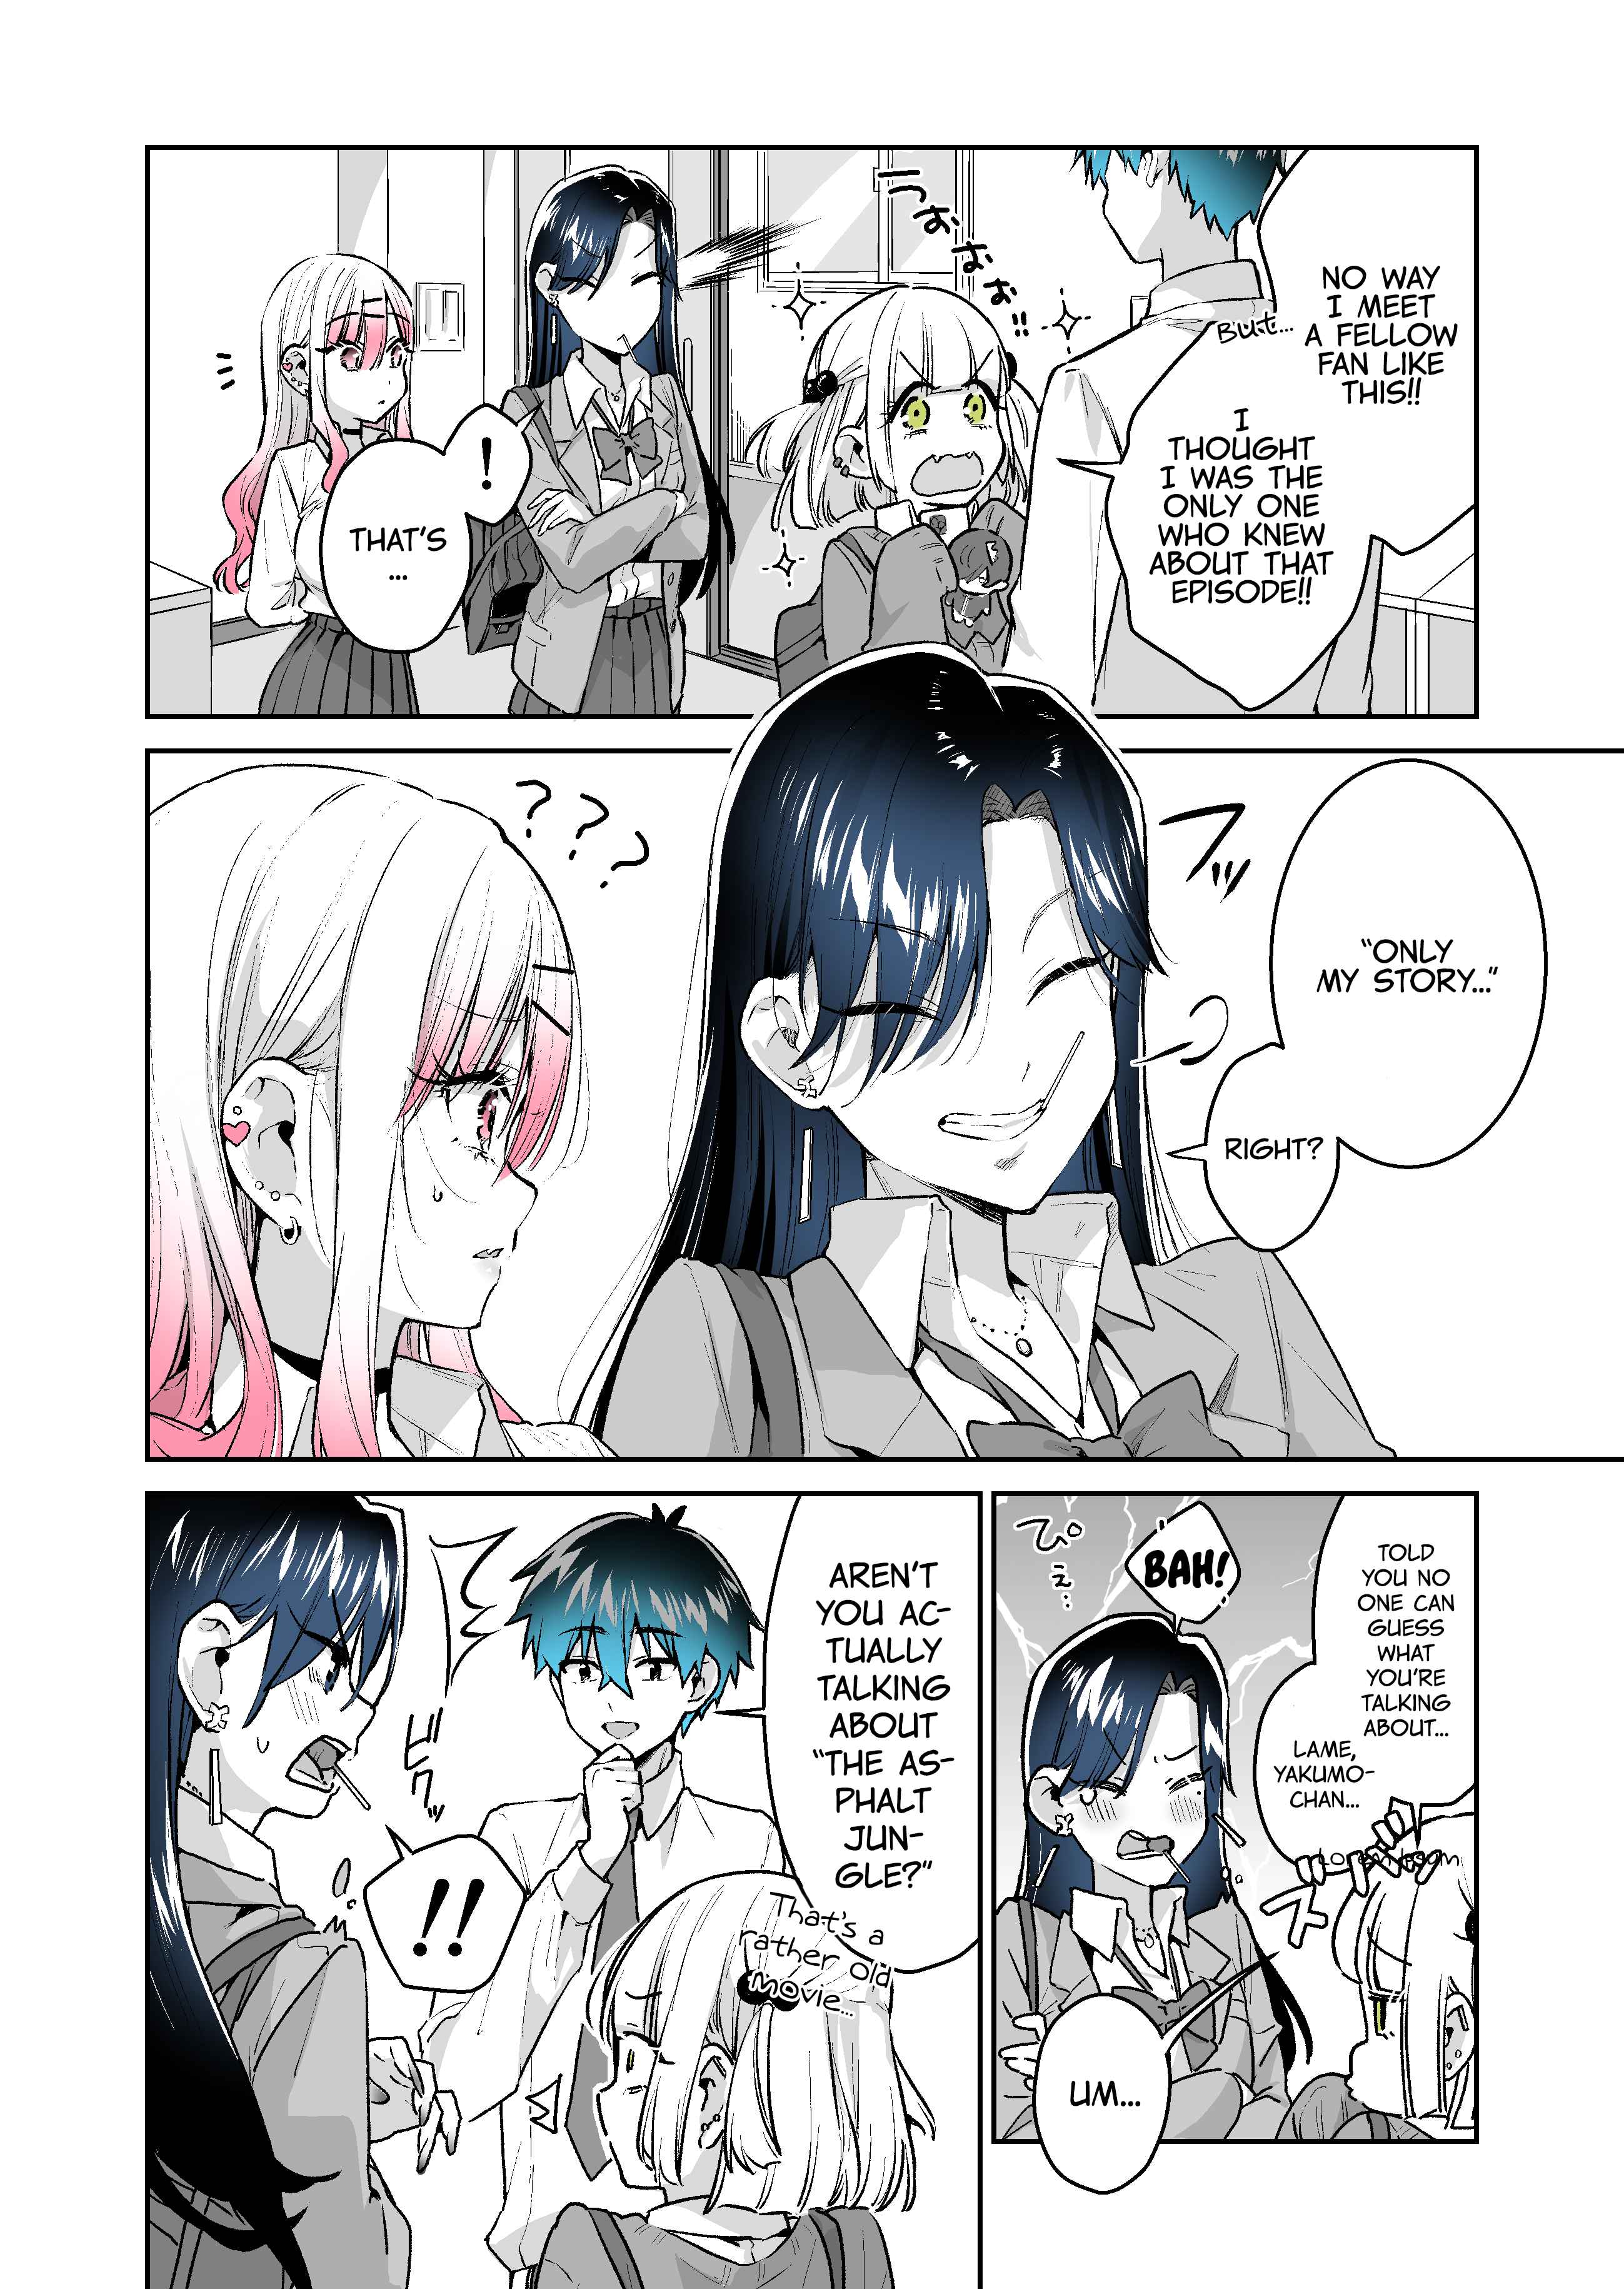 Want to Be Praised by a Gal Gamer - chapter 26 - #4